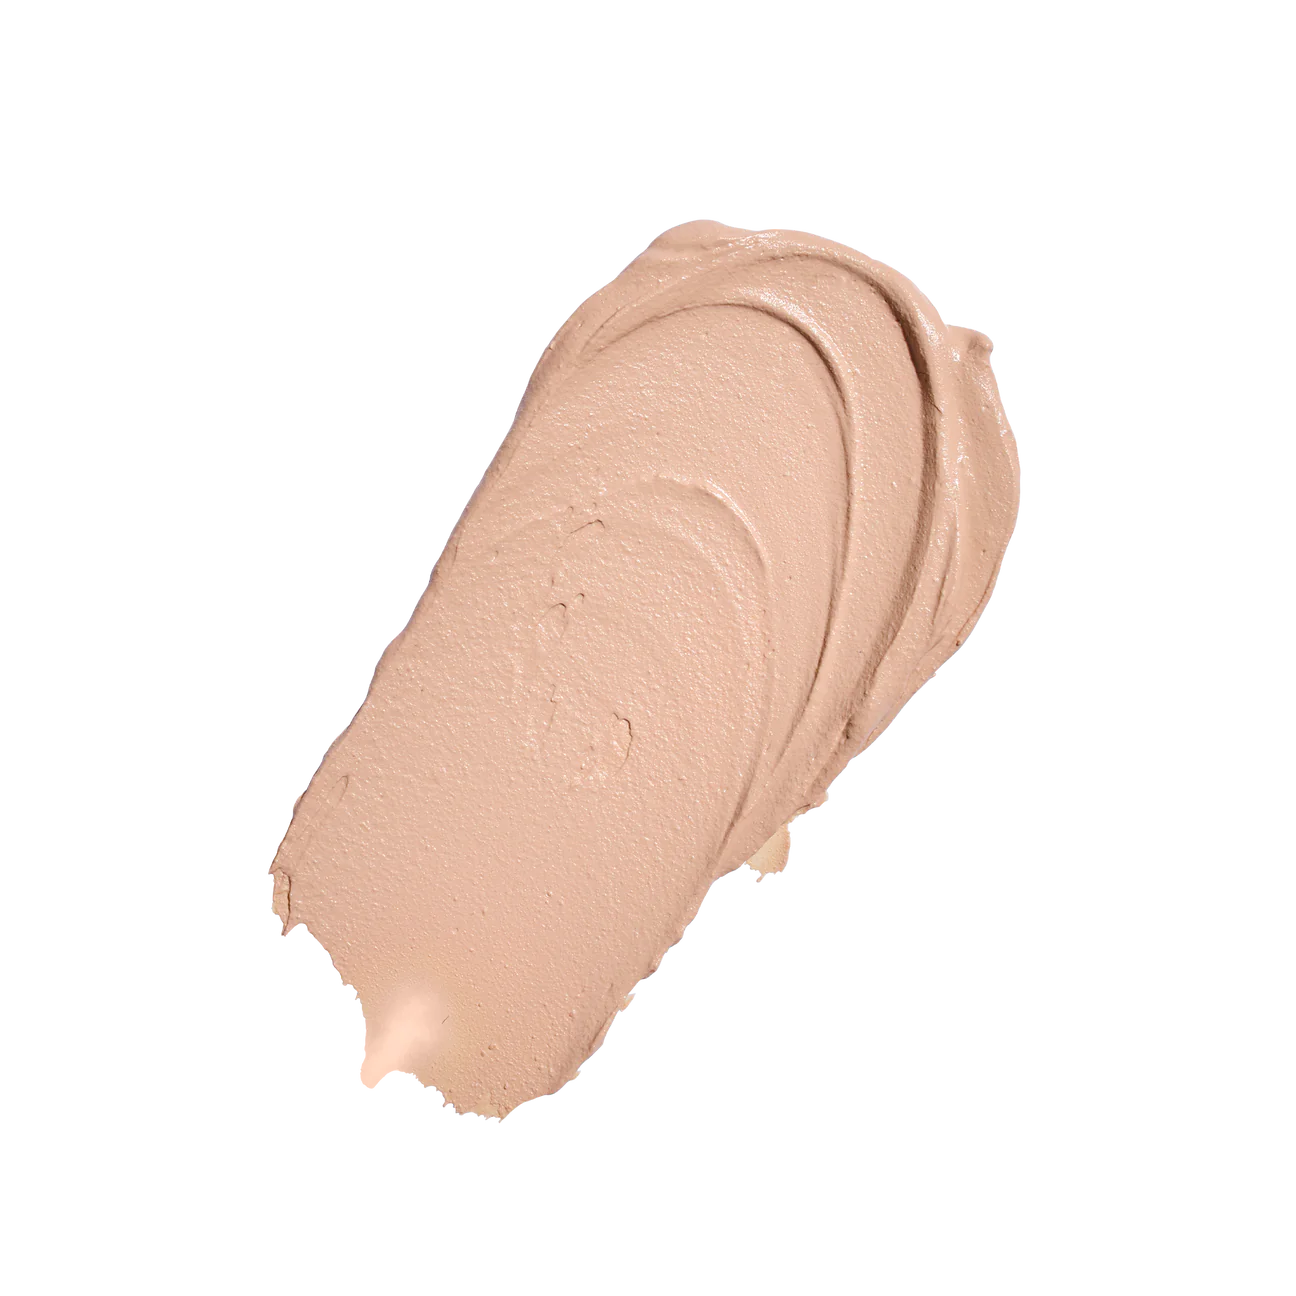 Colorescience Tint Du Soleil Whipped Mineral Foundation SPF 30 in Light